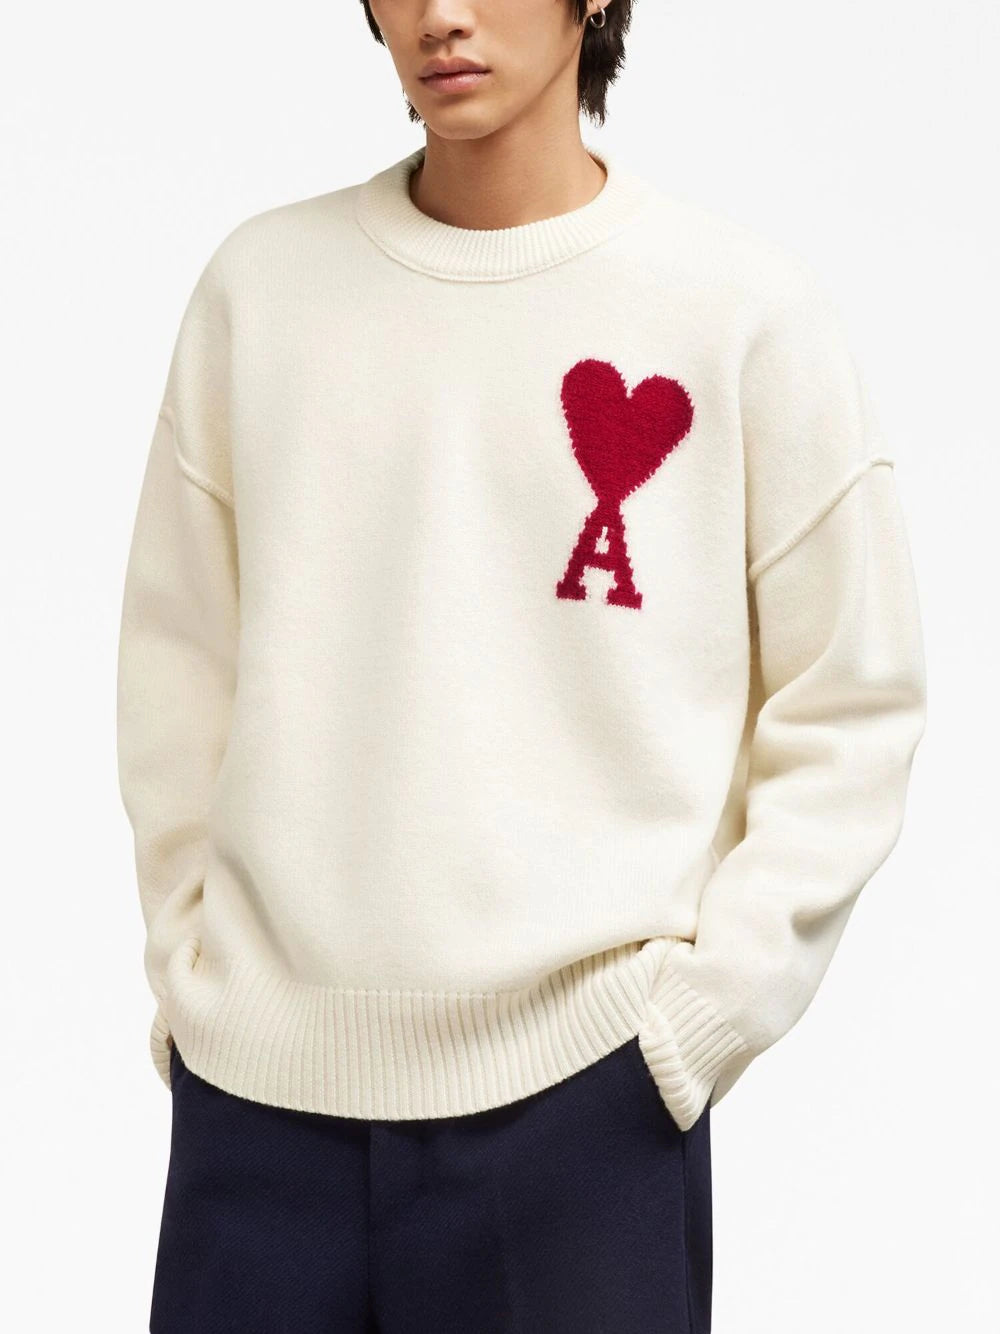 Ami Paris Knitted Sweater